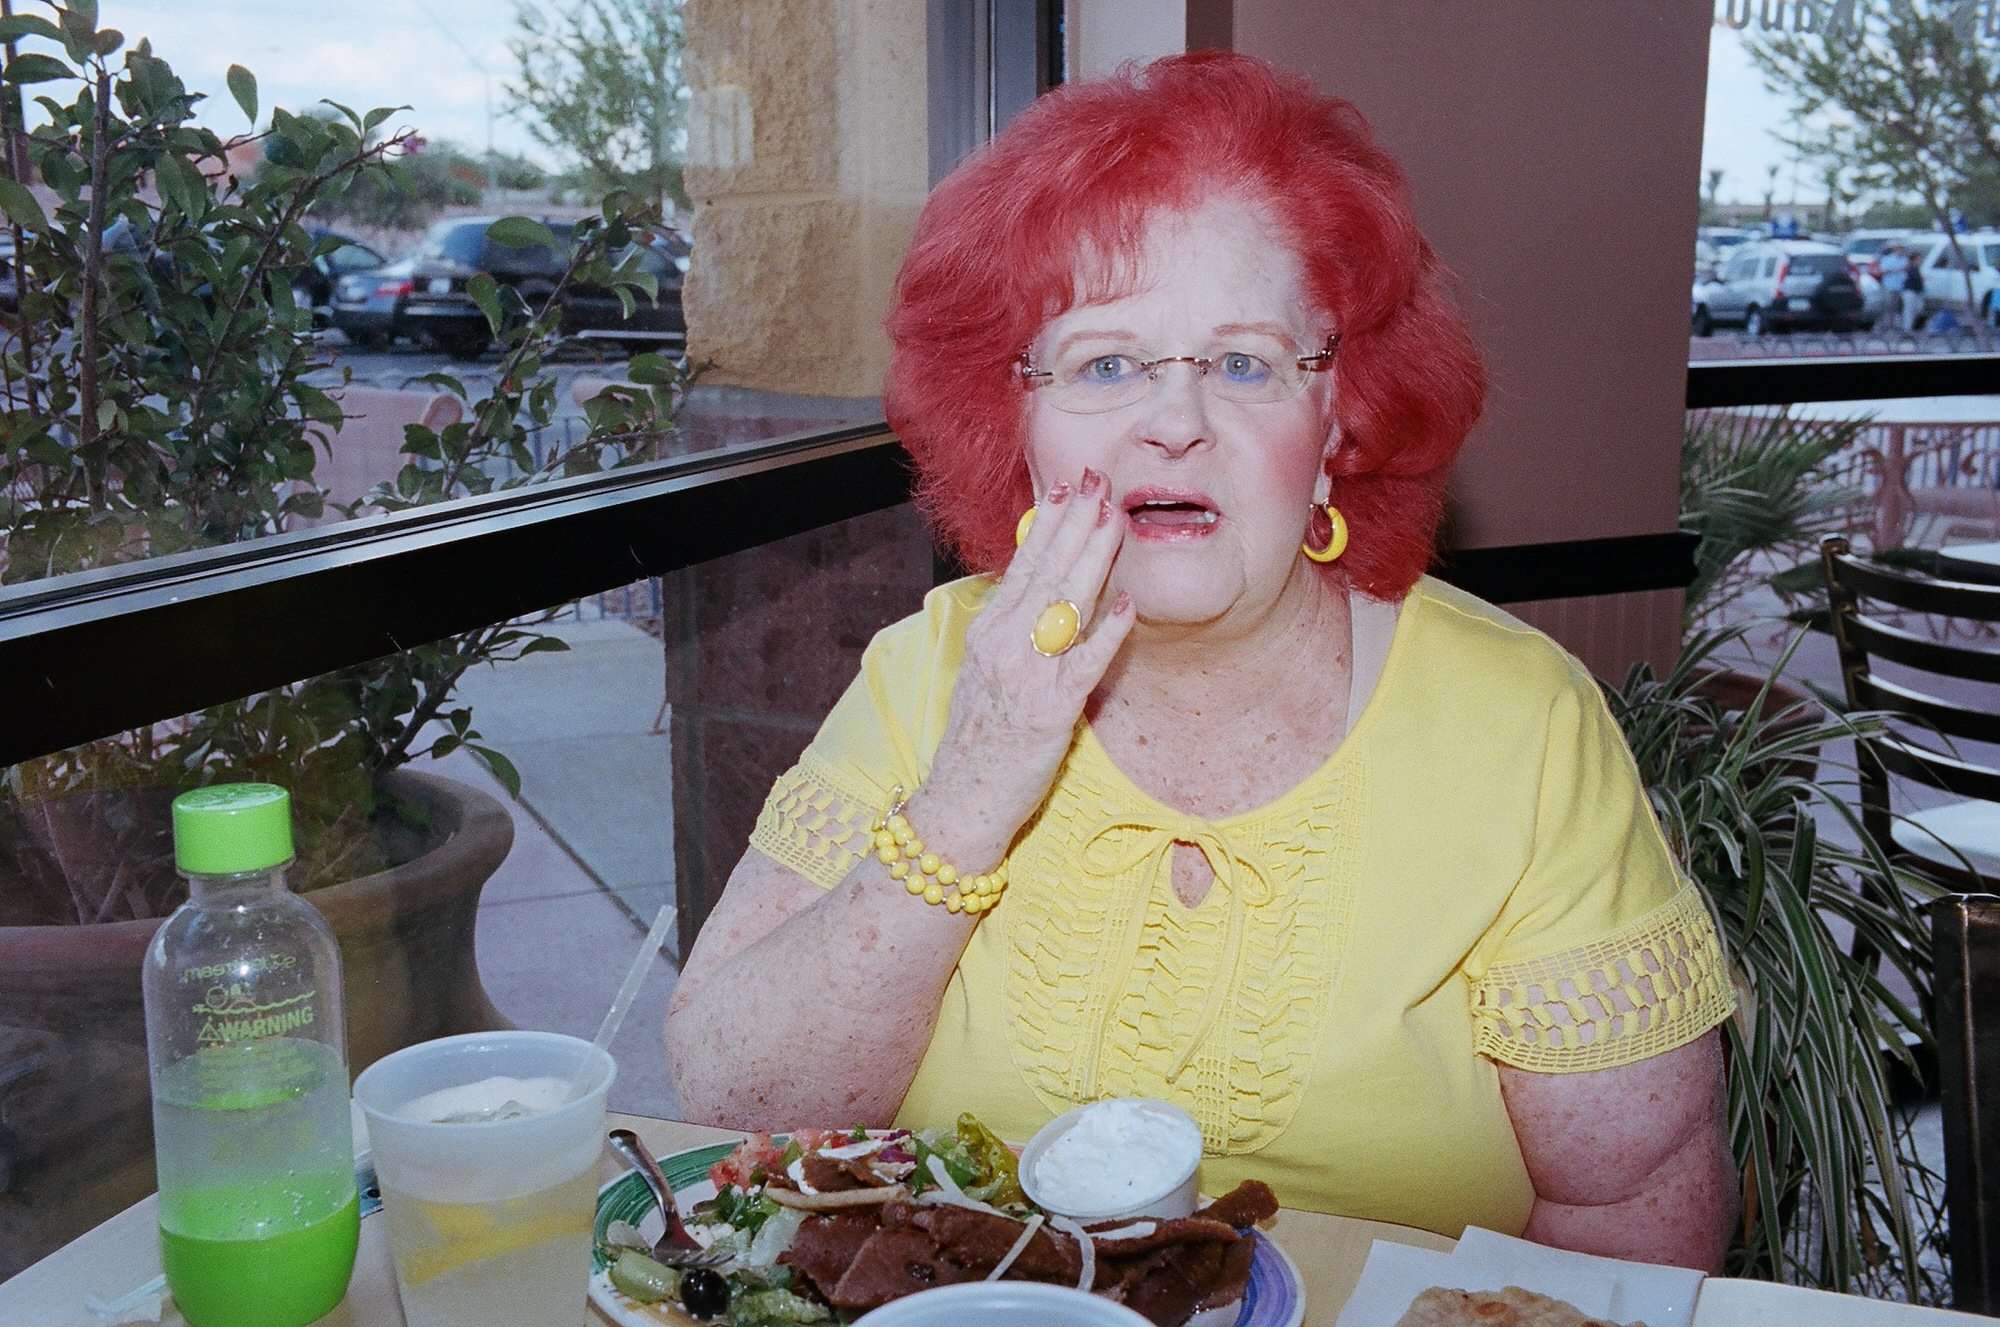 eric kim street photography - Only in America-red hair lady